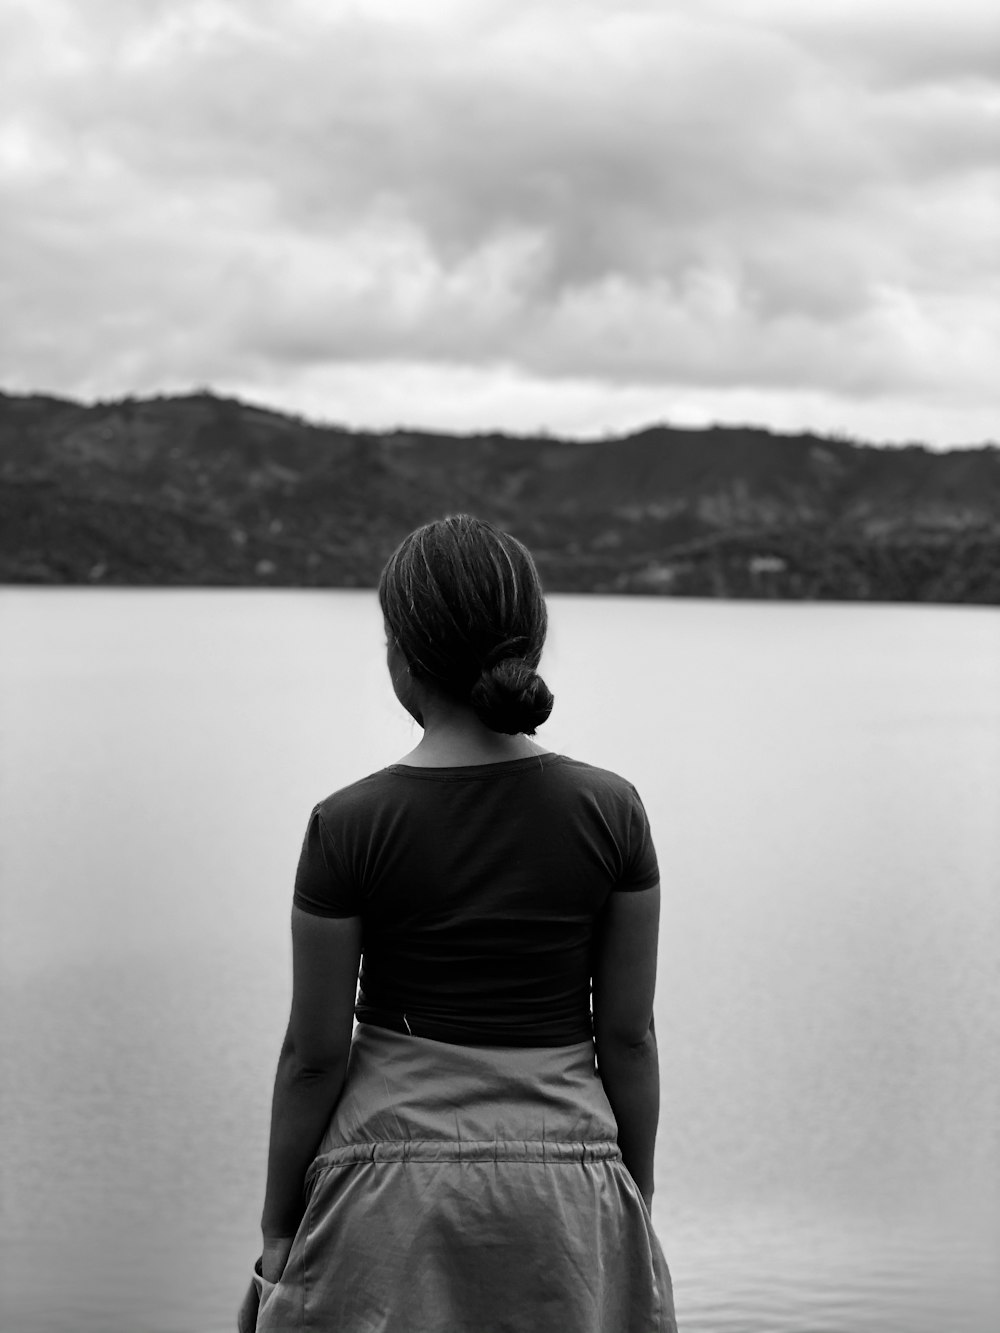 grayscale photo of man in black t-shirt standing near body of water